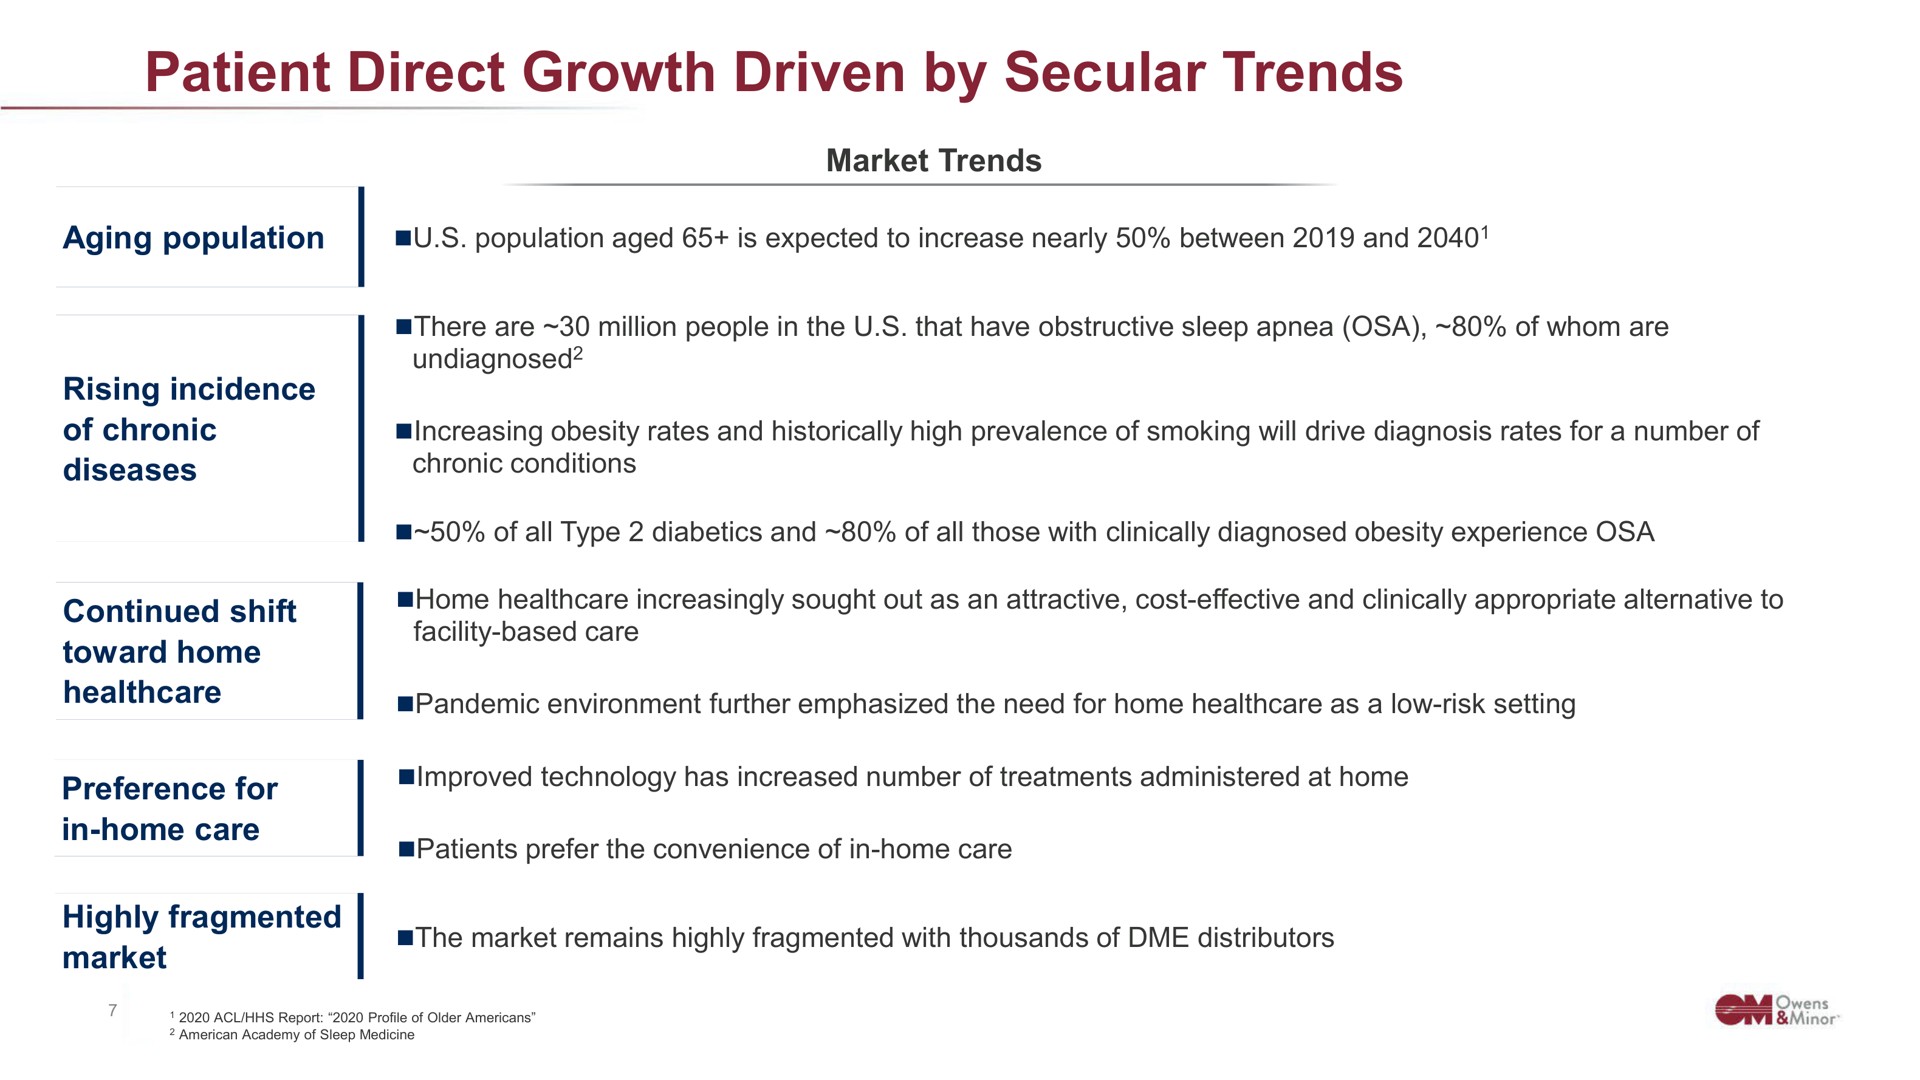 patient direct growth driven by secular trends | Owens&Minor